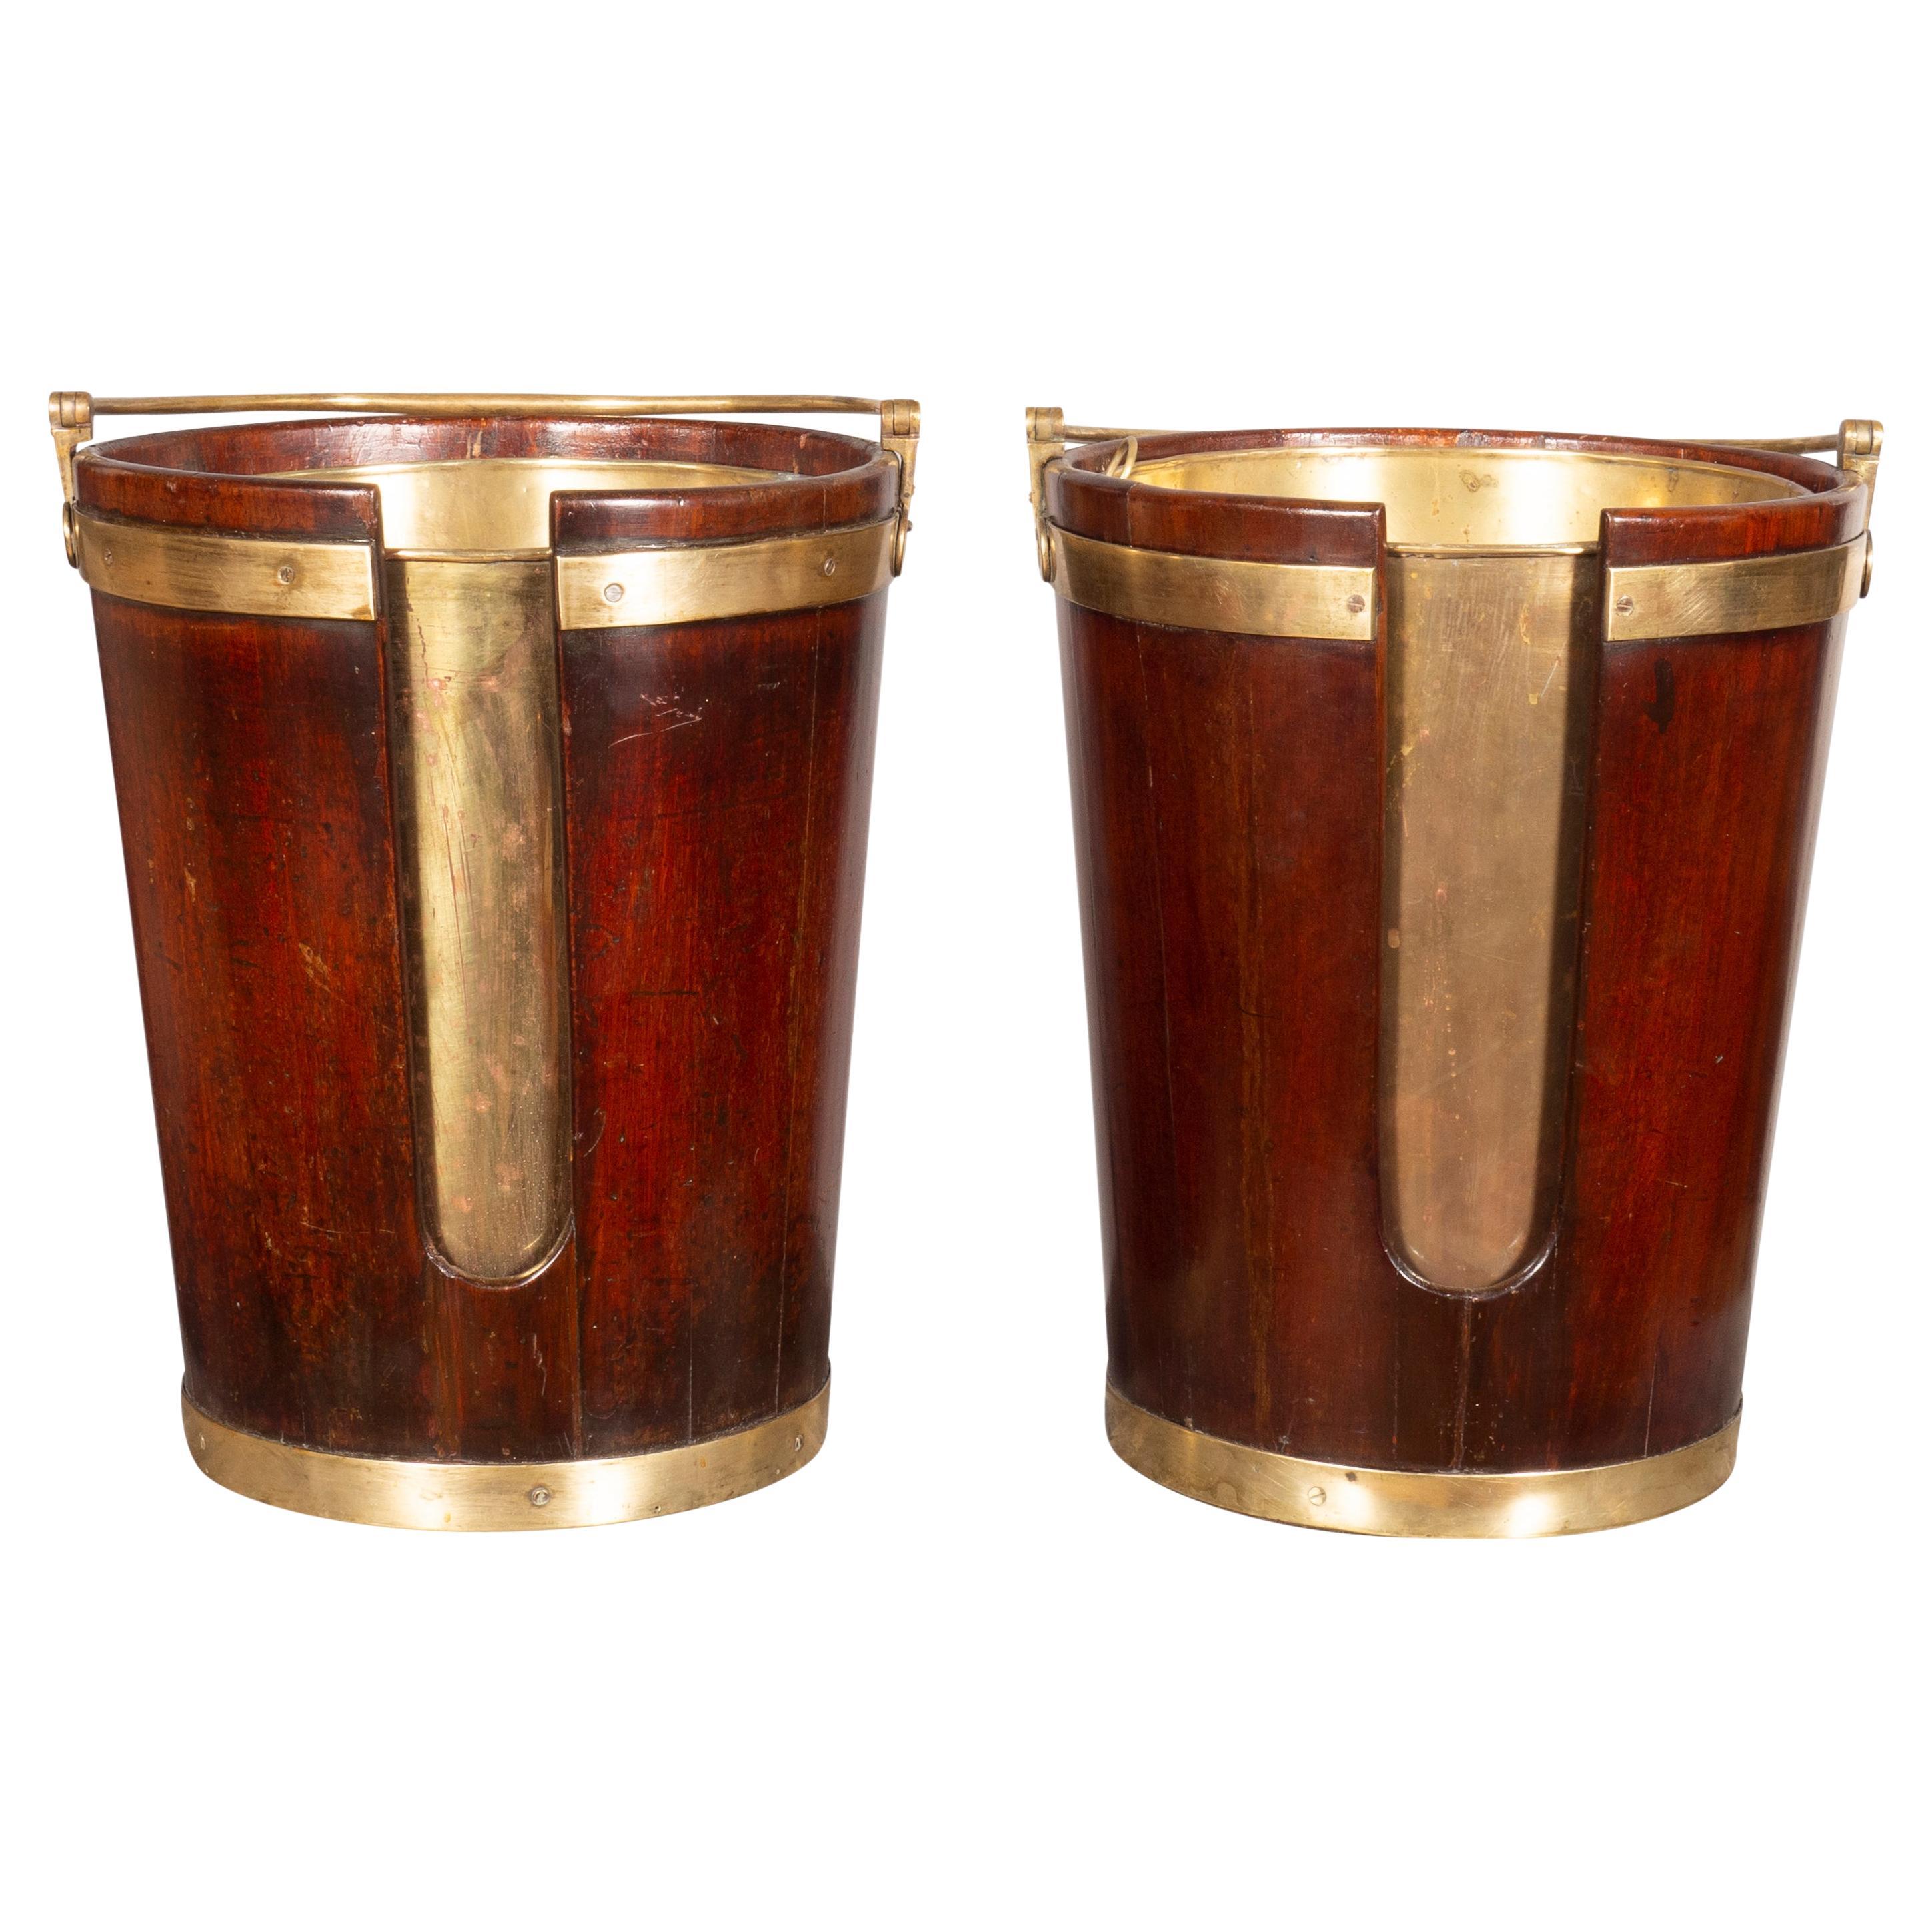 Pair of Regency Mahogany and Brass Banded Plate Buckets For Sale